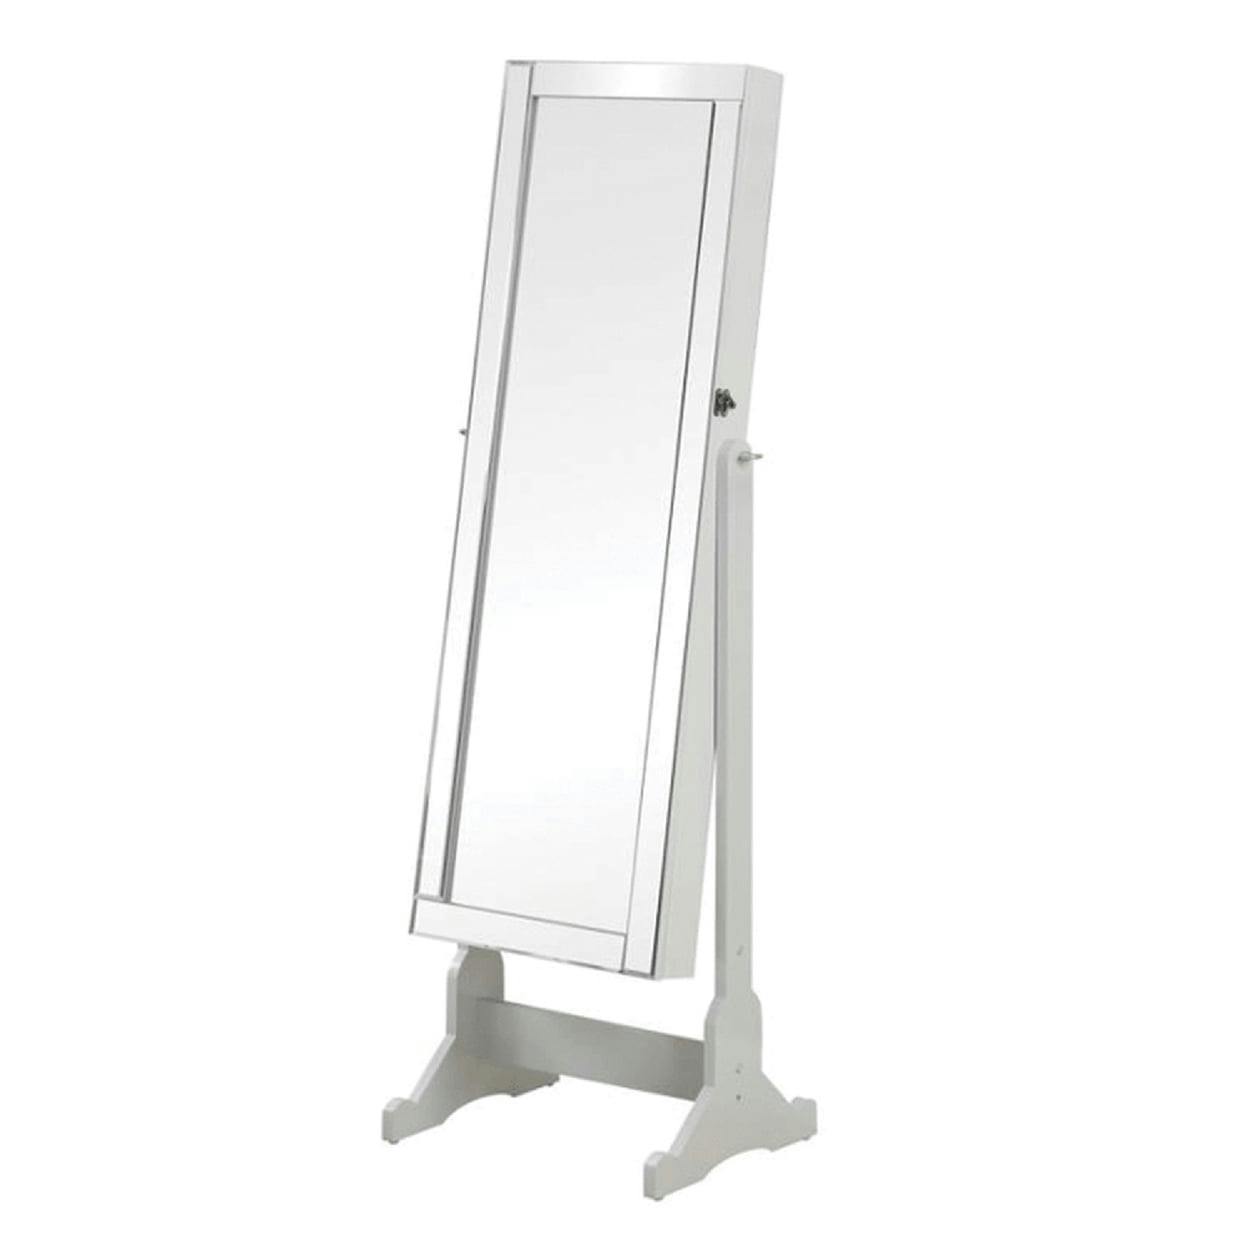 Contemporary White and Gray Jewelry Armoire with Full-Length Mirror